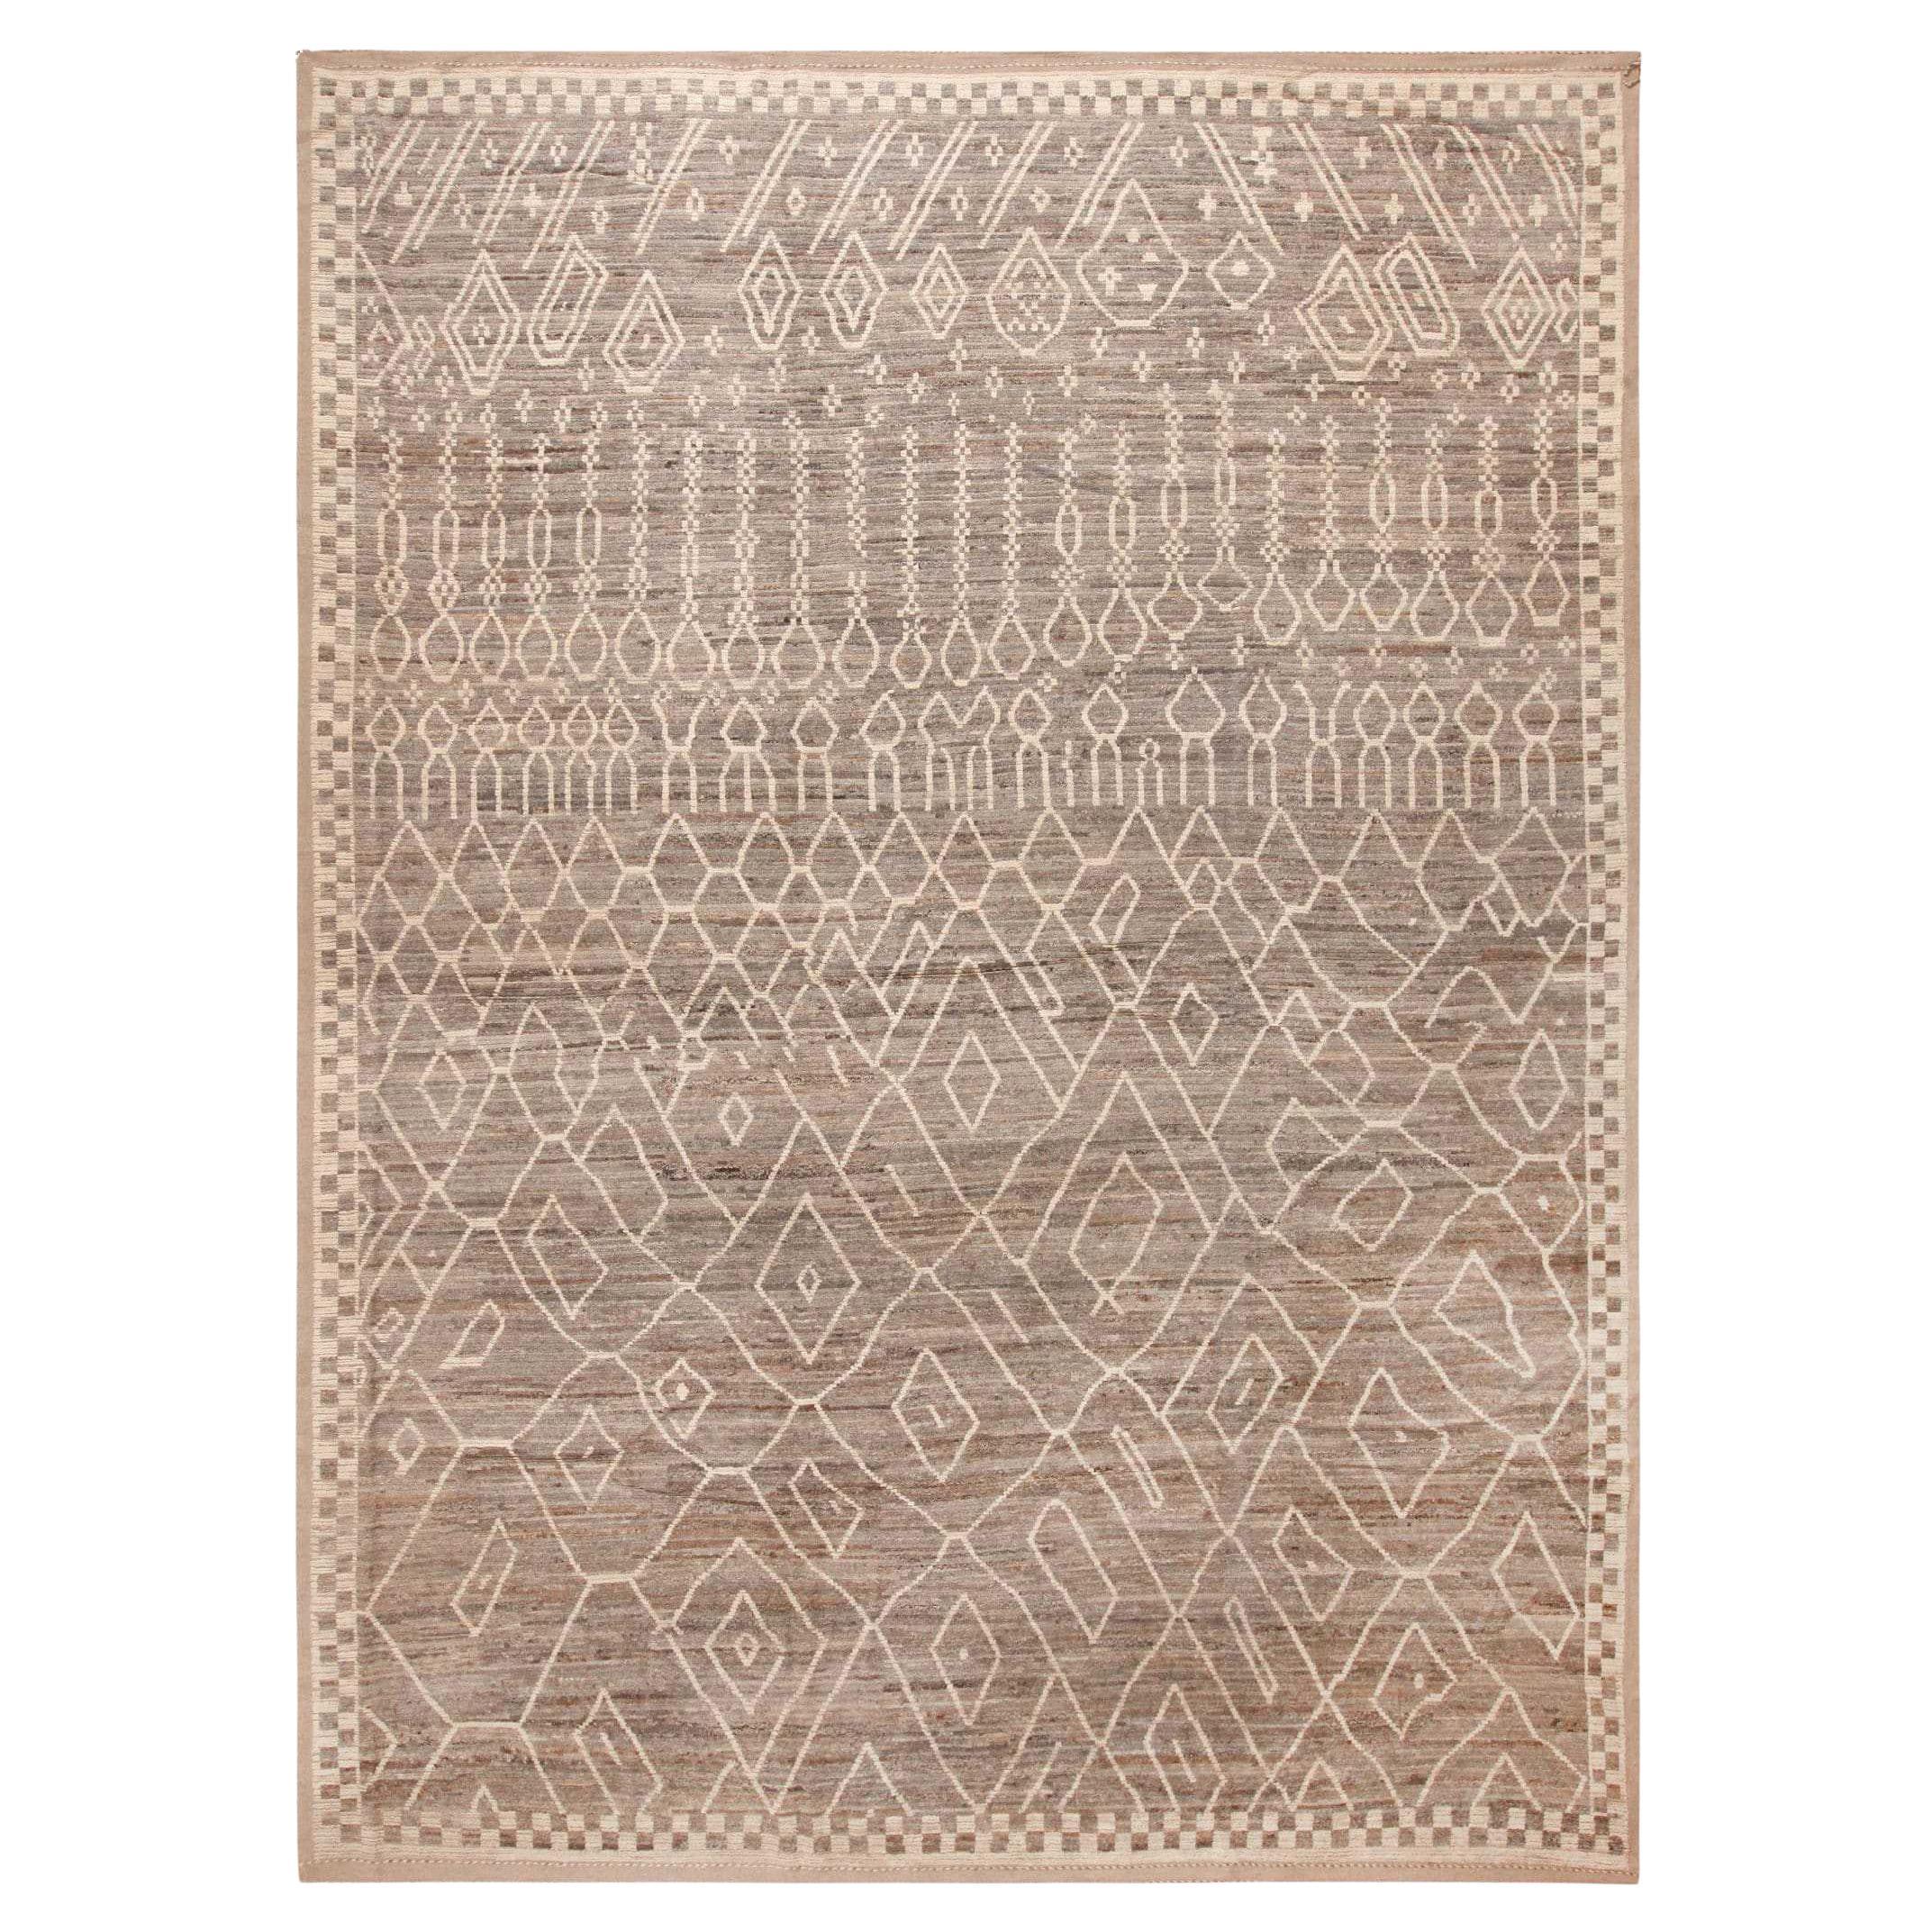 The Collective Primitive Tribal Design Modernity Area Rug 12' x 16'1" (collection Nazmiyal)